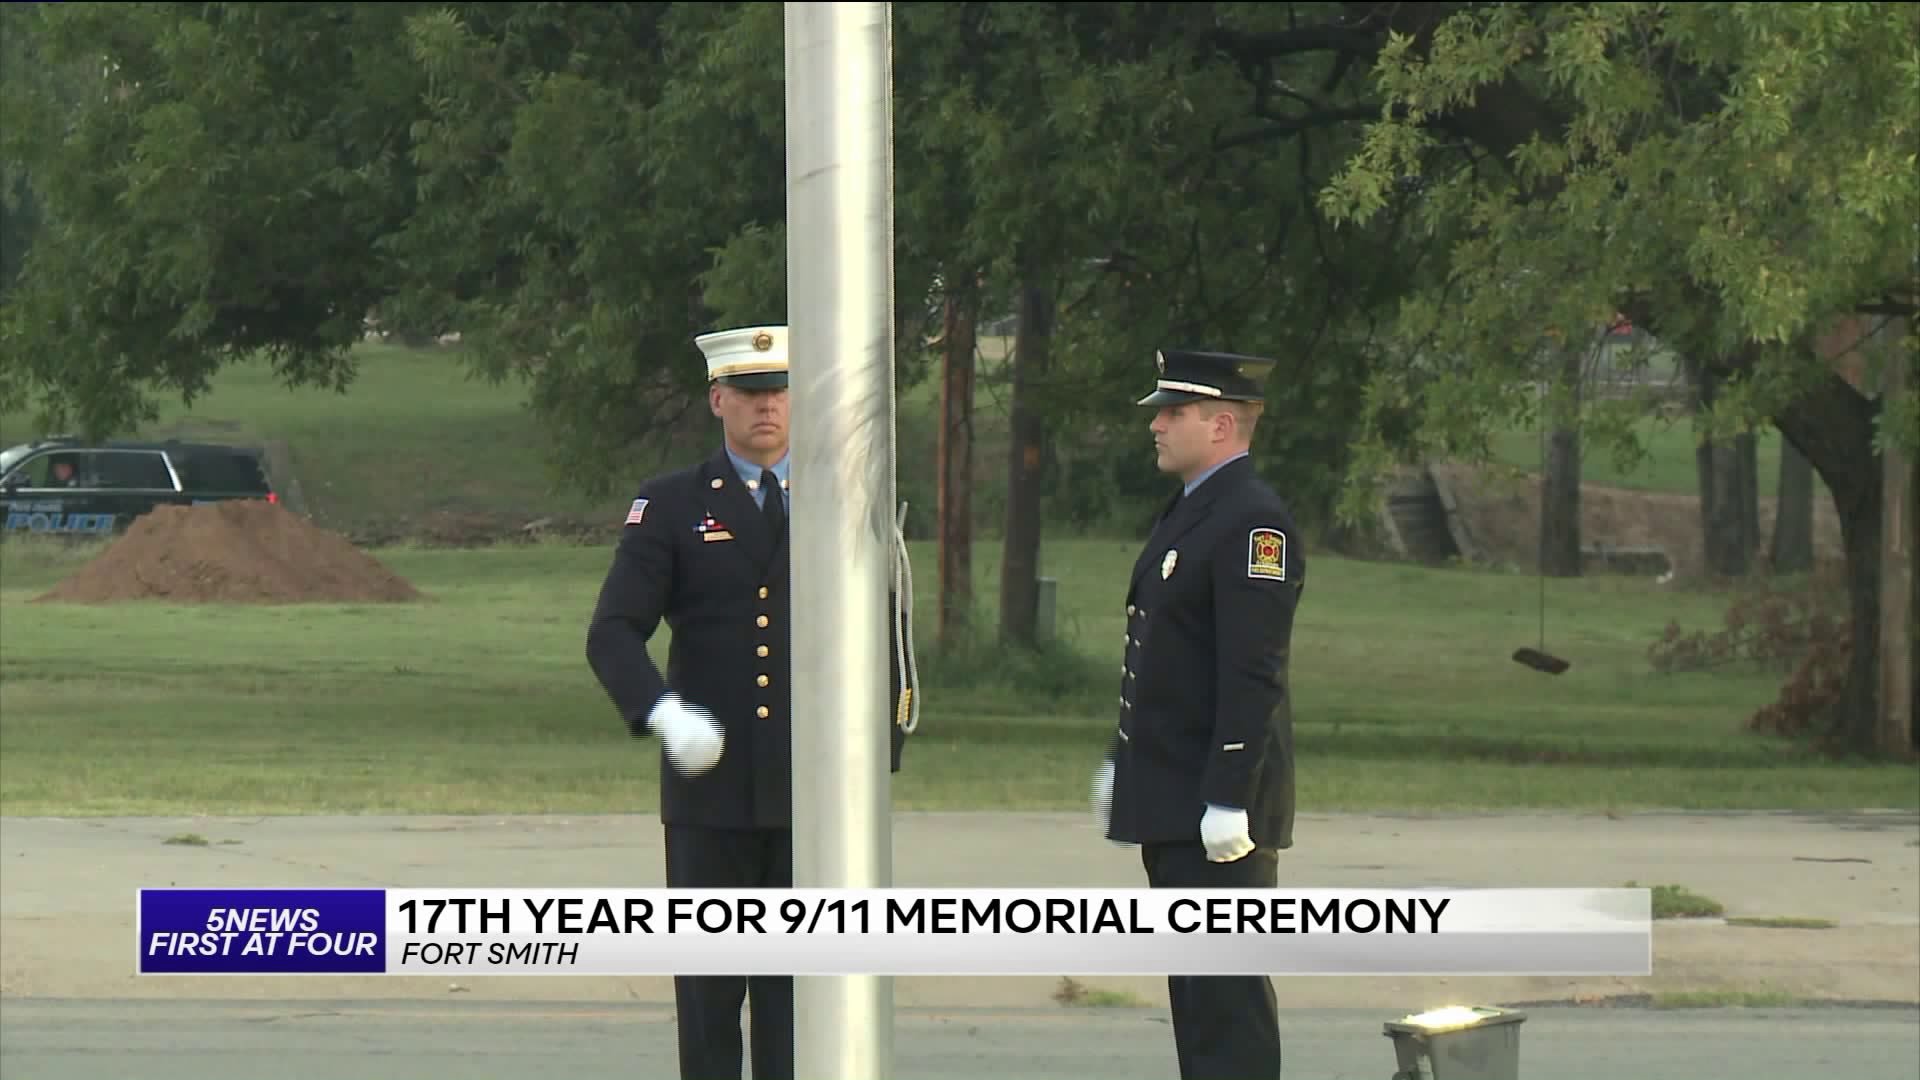 Fort Smith Fire Department Honors 9/11 Victims And Families